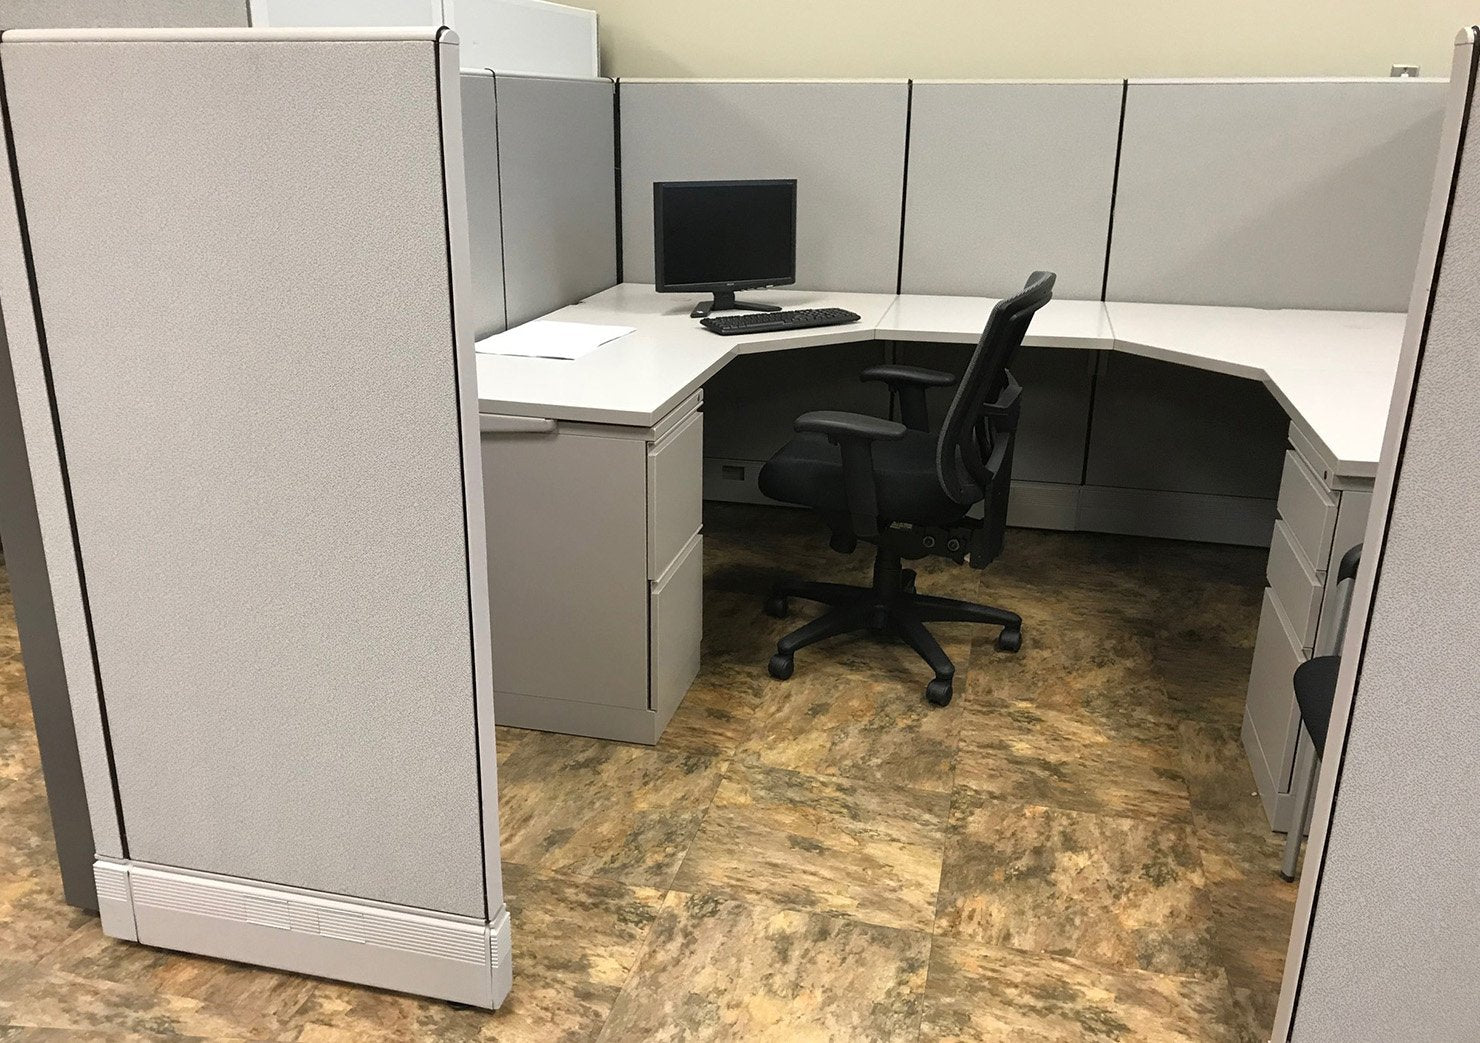 Herman Miller AO3 Cubicle with new fabric options